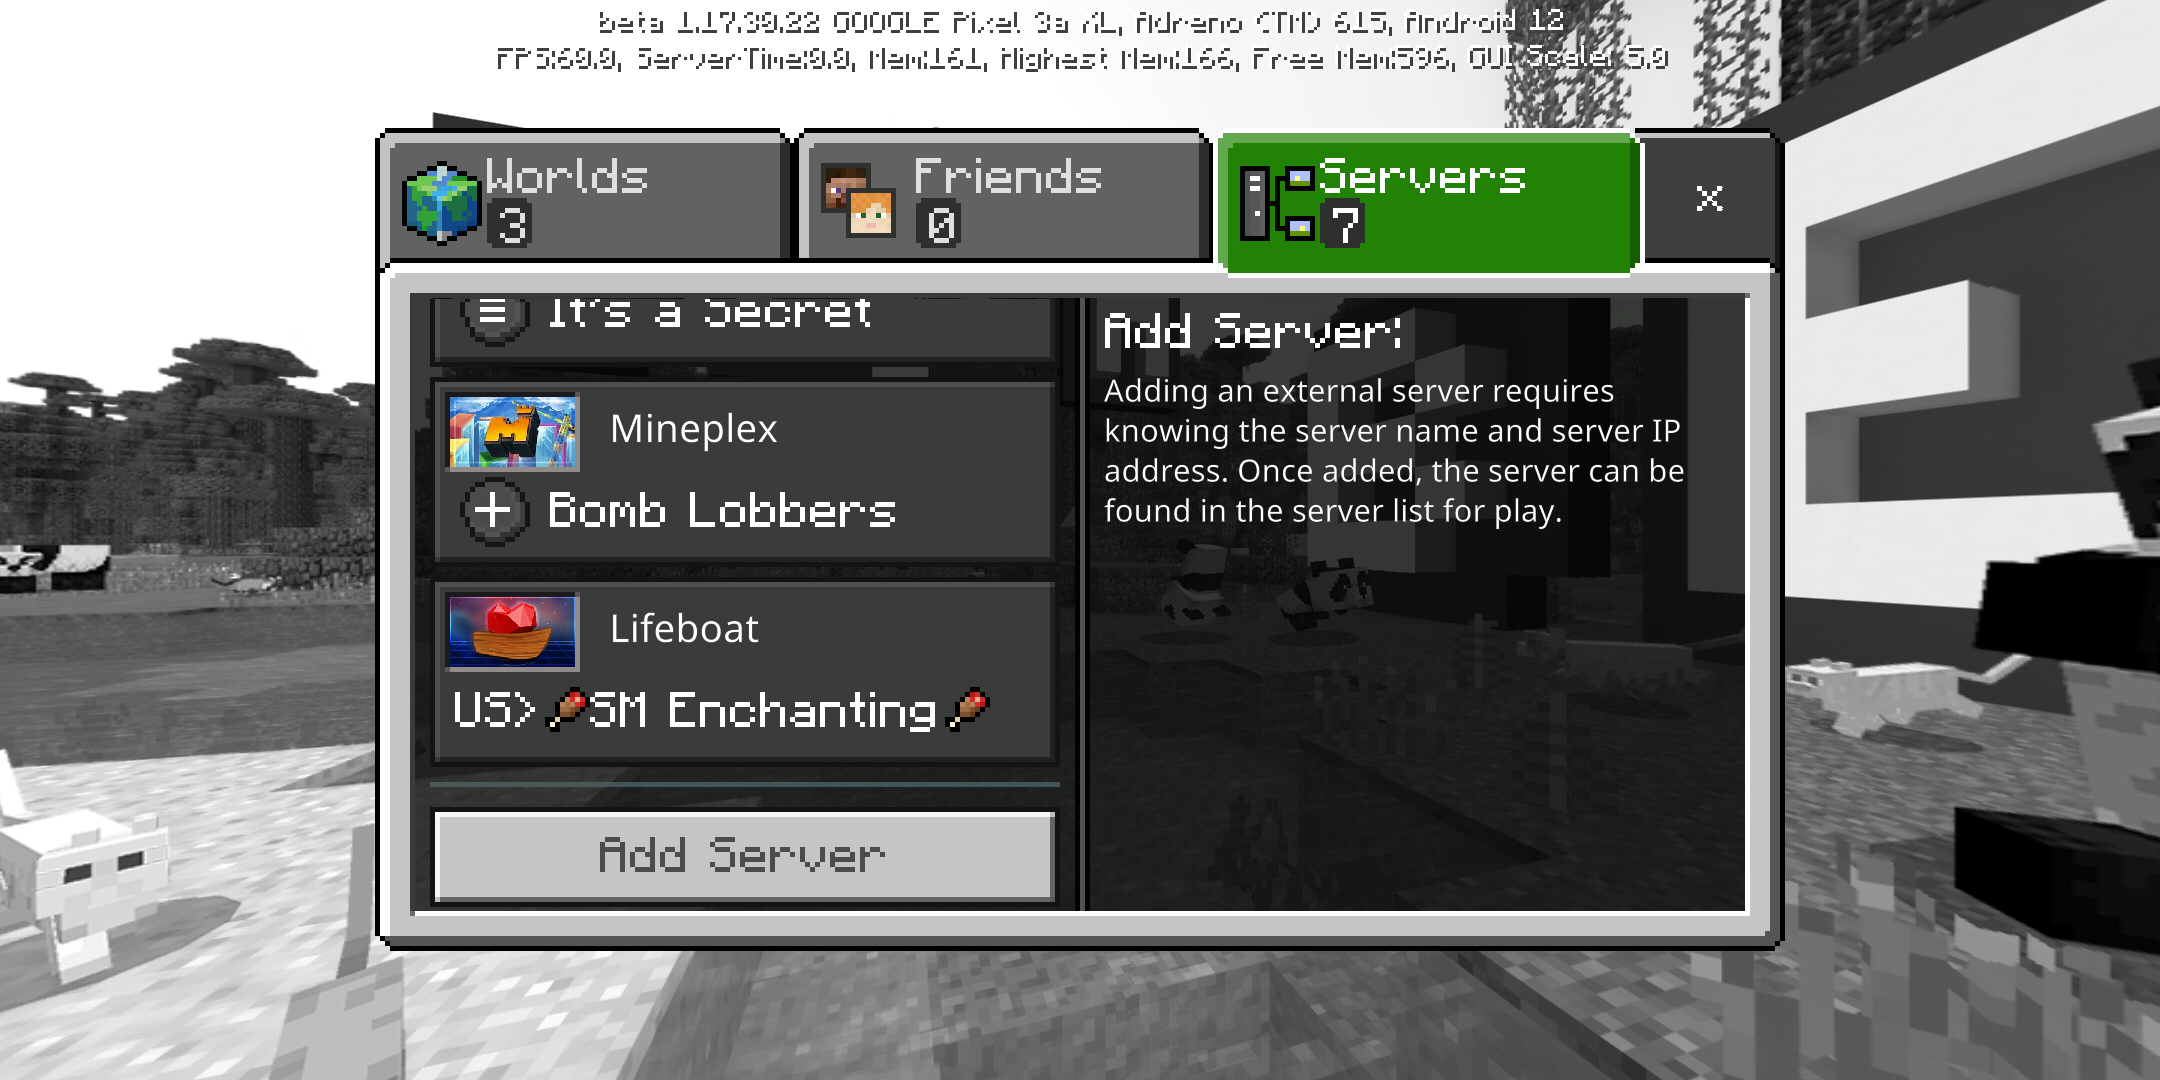 Minecraft Server list scrolled to the bottom with a button to Add Server